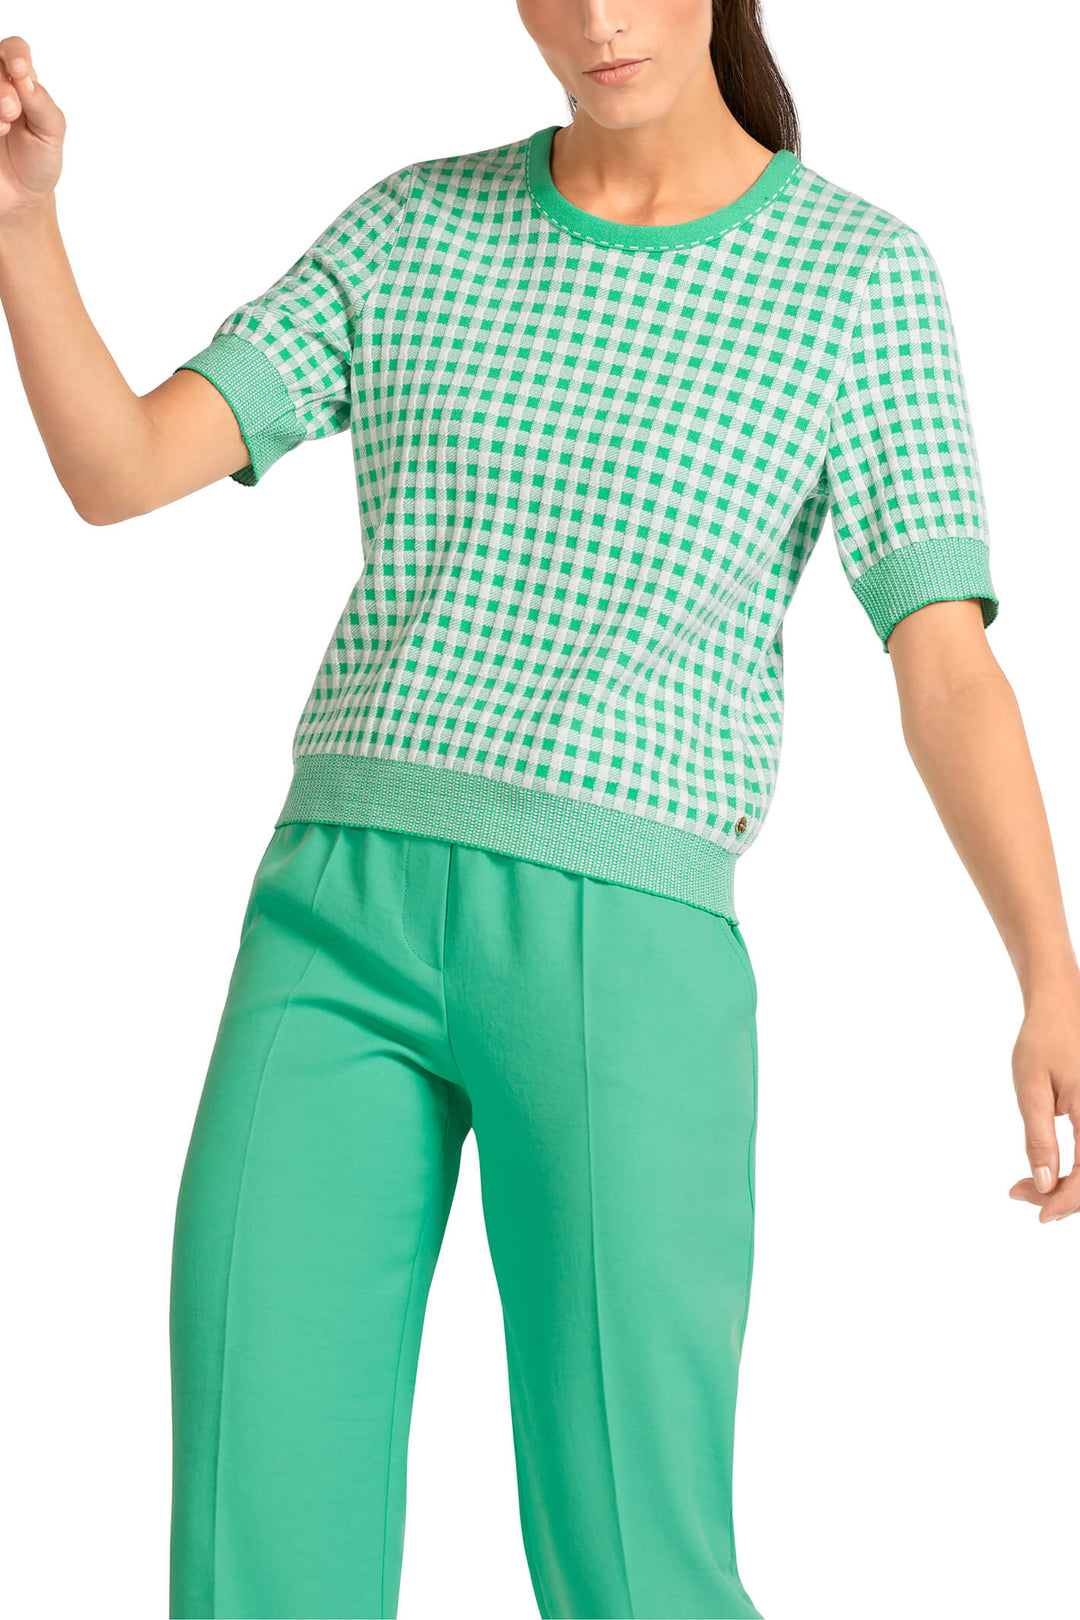 Marc Cain Collection UC 41.25 M13 Bright Jade Green Check Jumper - Olivia Grace Fashion